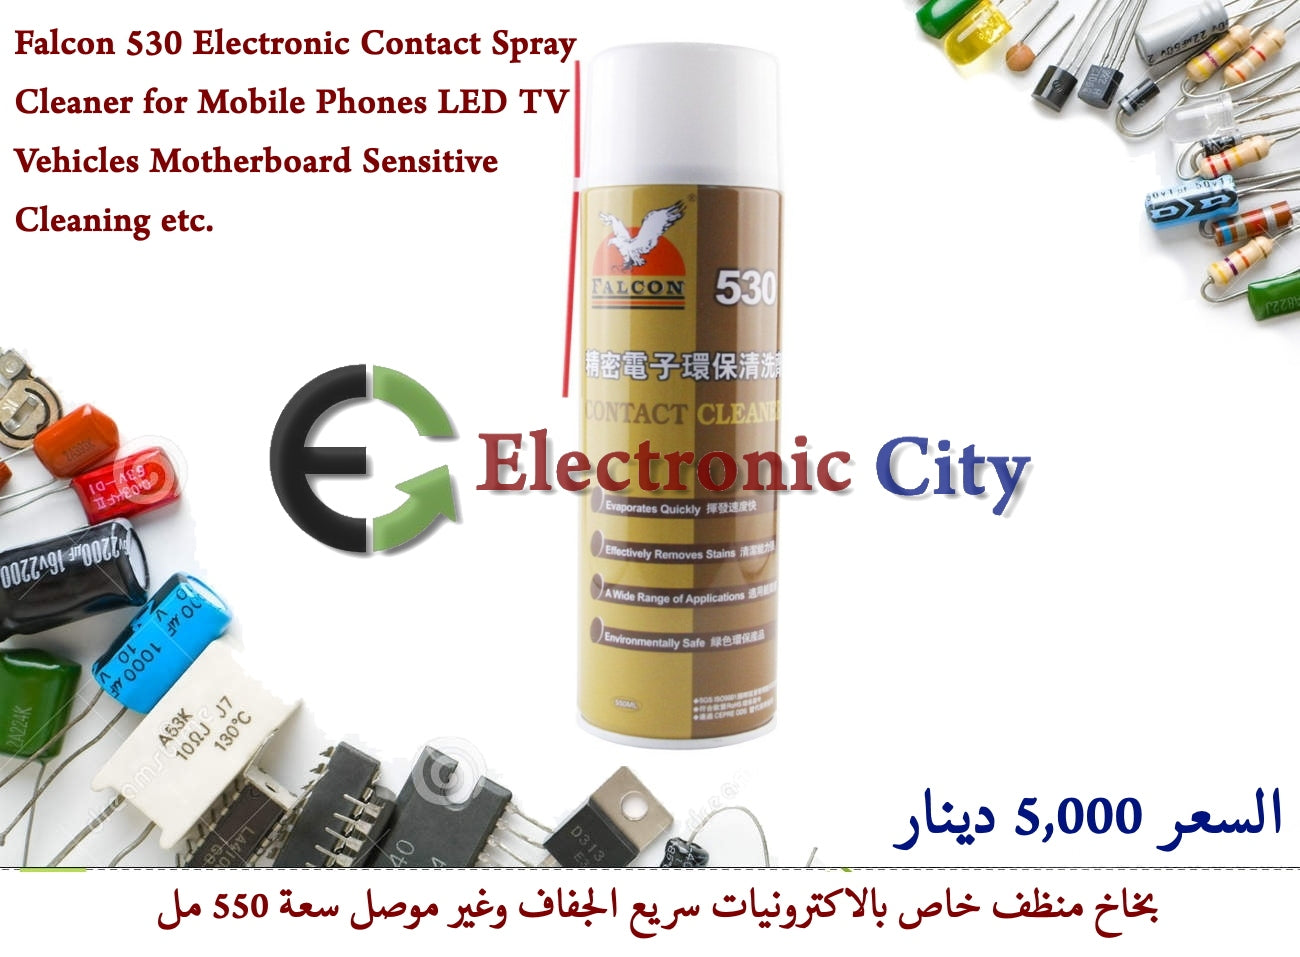 Electronic Contact Spray Cleaner 530  for Mobile Phones LED TV Vehicles Motherboard Sensitive Cleaning etc.